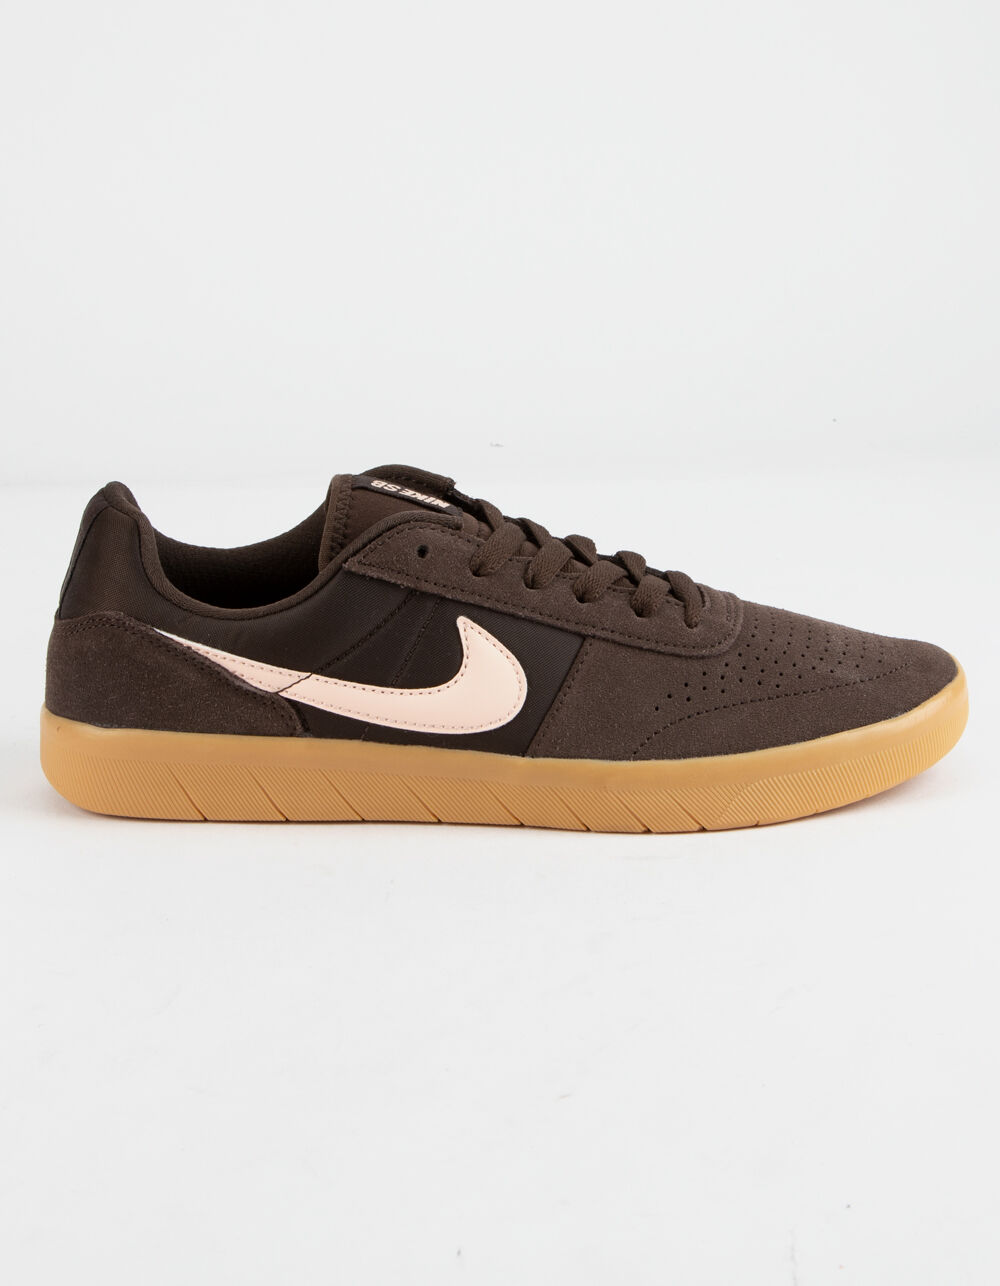 NIKE SB Team Baroque Brown & Washed Coral Shoes - BAROQUE BROWN/WASHED CORAL | Tillys